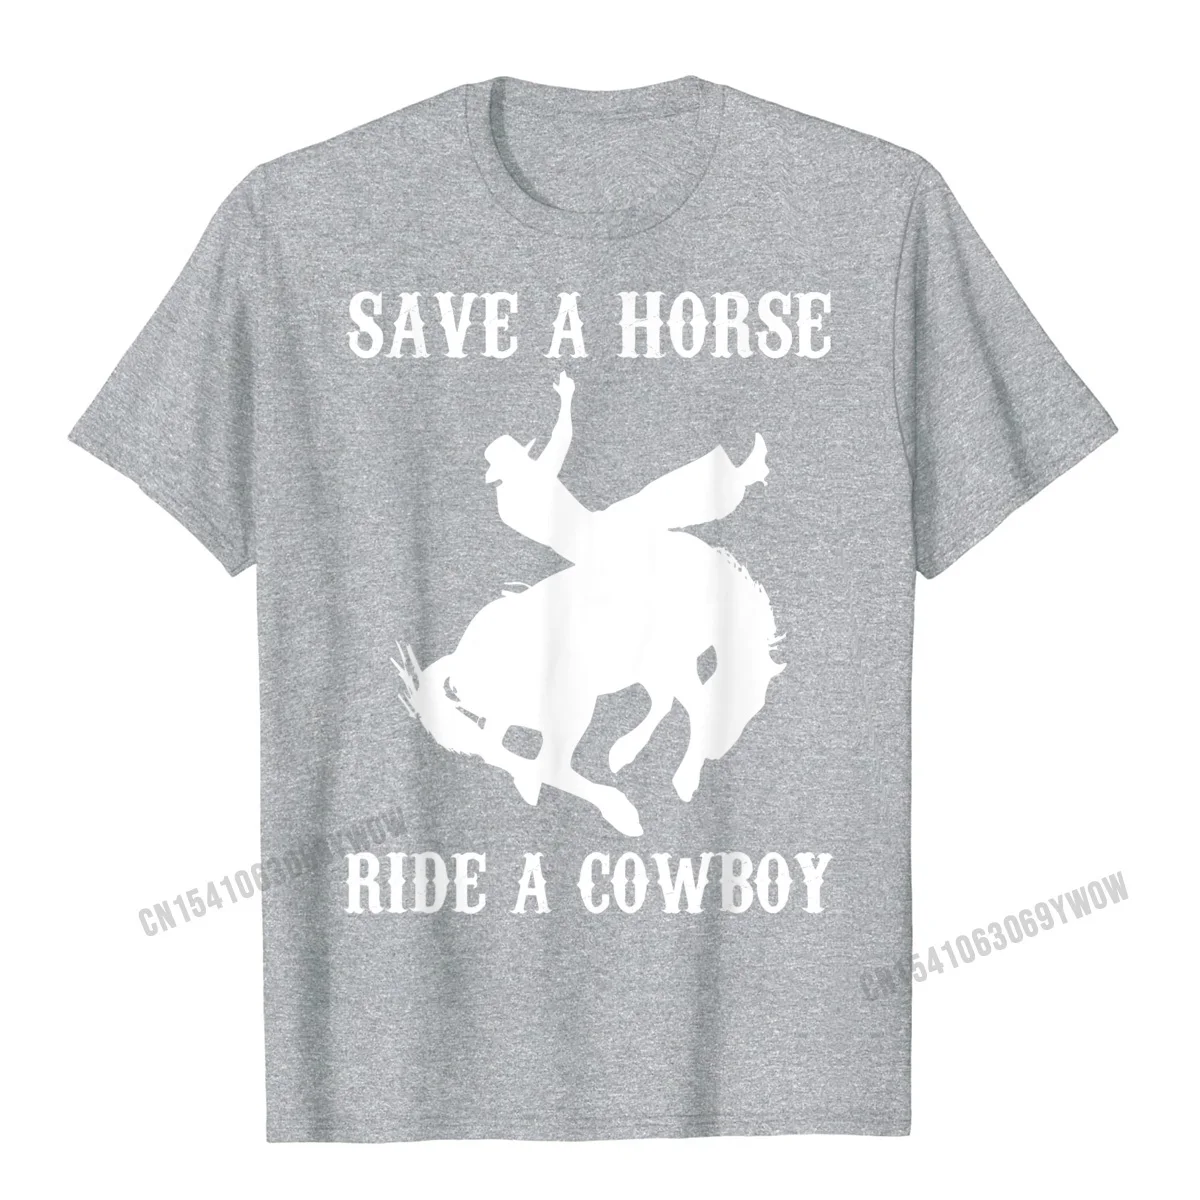 Leisure Cotton Normal Tops Tees Hip Hop Short Sleeve Young Tshirts Fashionable Father Day T Shirt O Neck Drop Shipping Save A Horse Ride A Cowboy T-Shirt funny saying sarcastic__971 grey